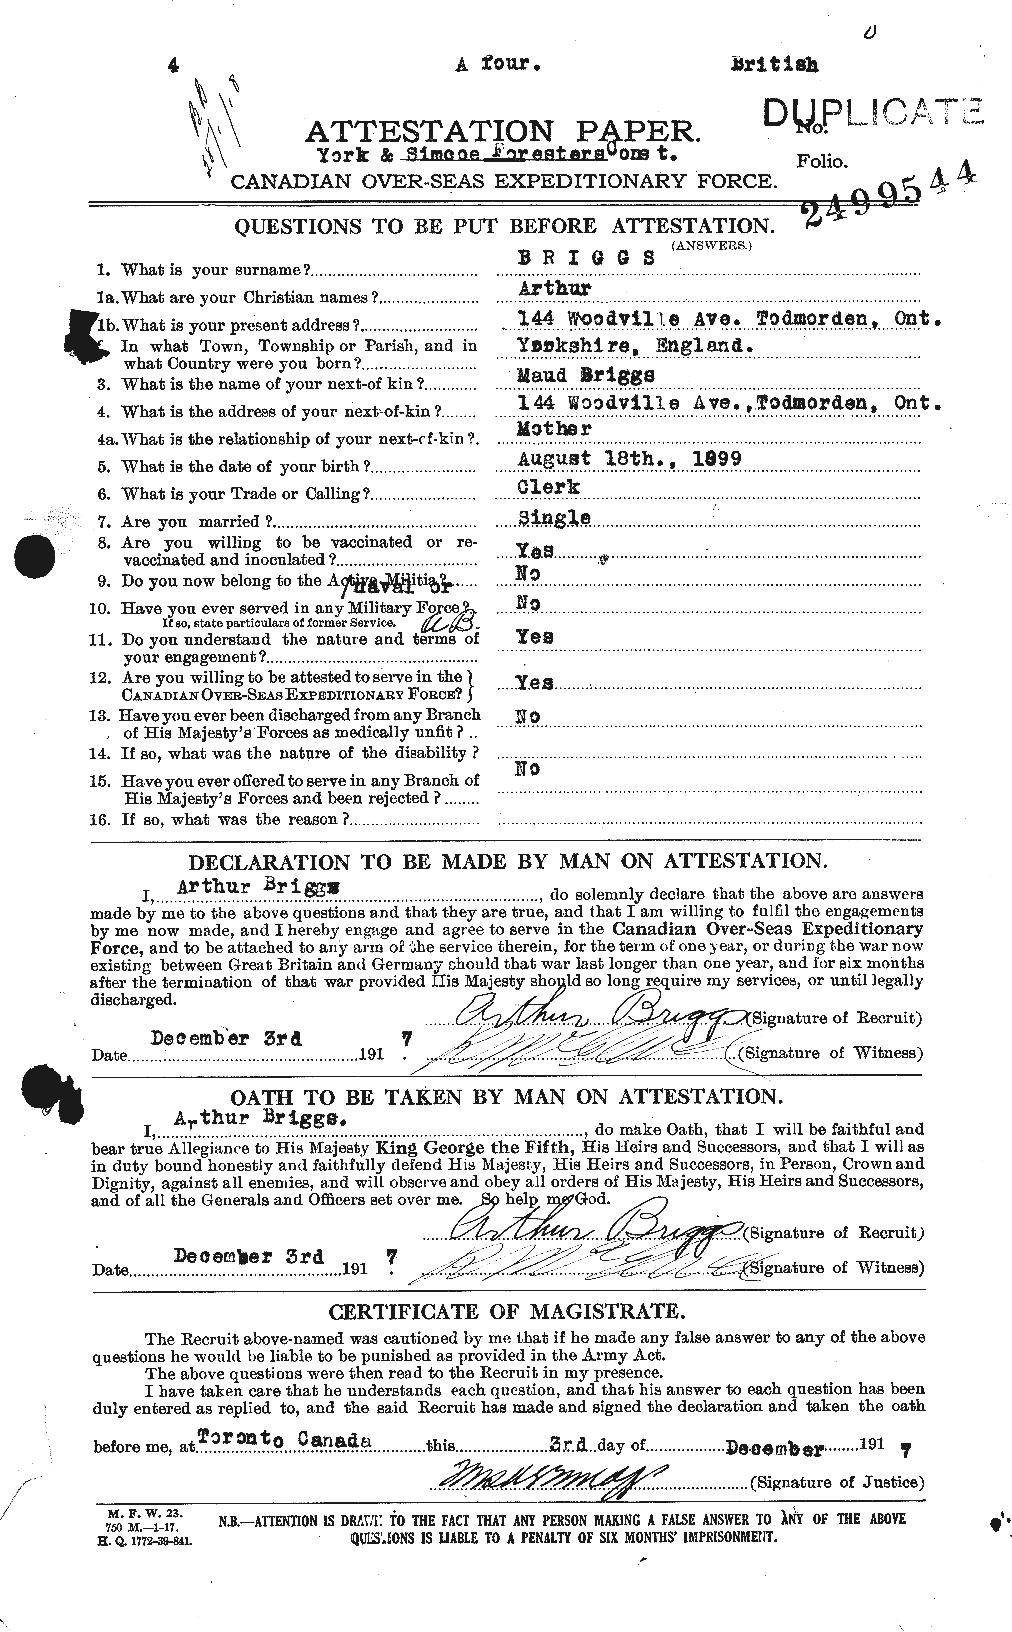 Personnel Records of the First World War - CEF 263967a